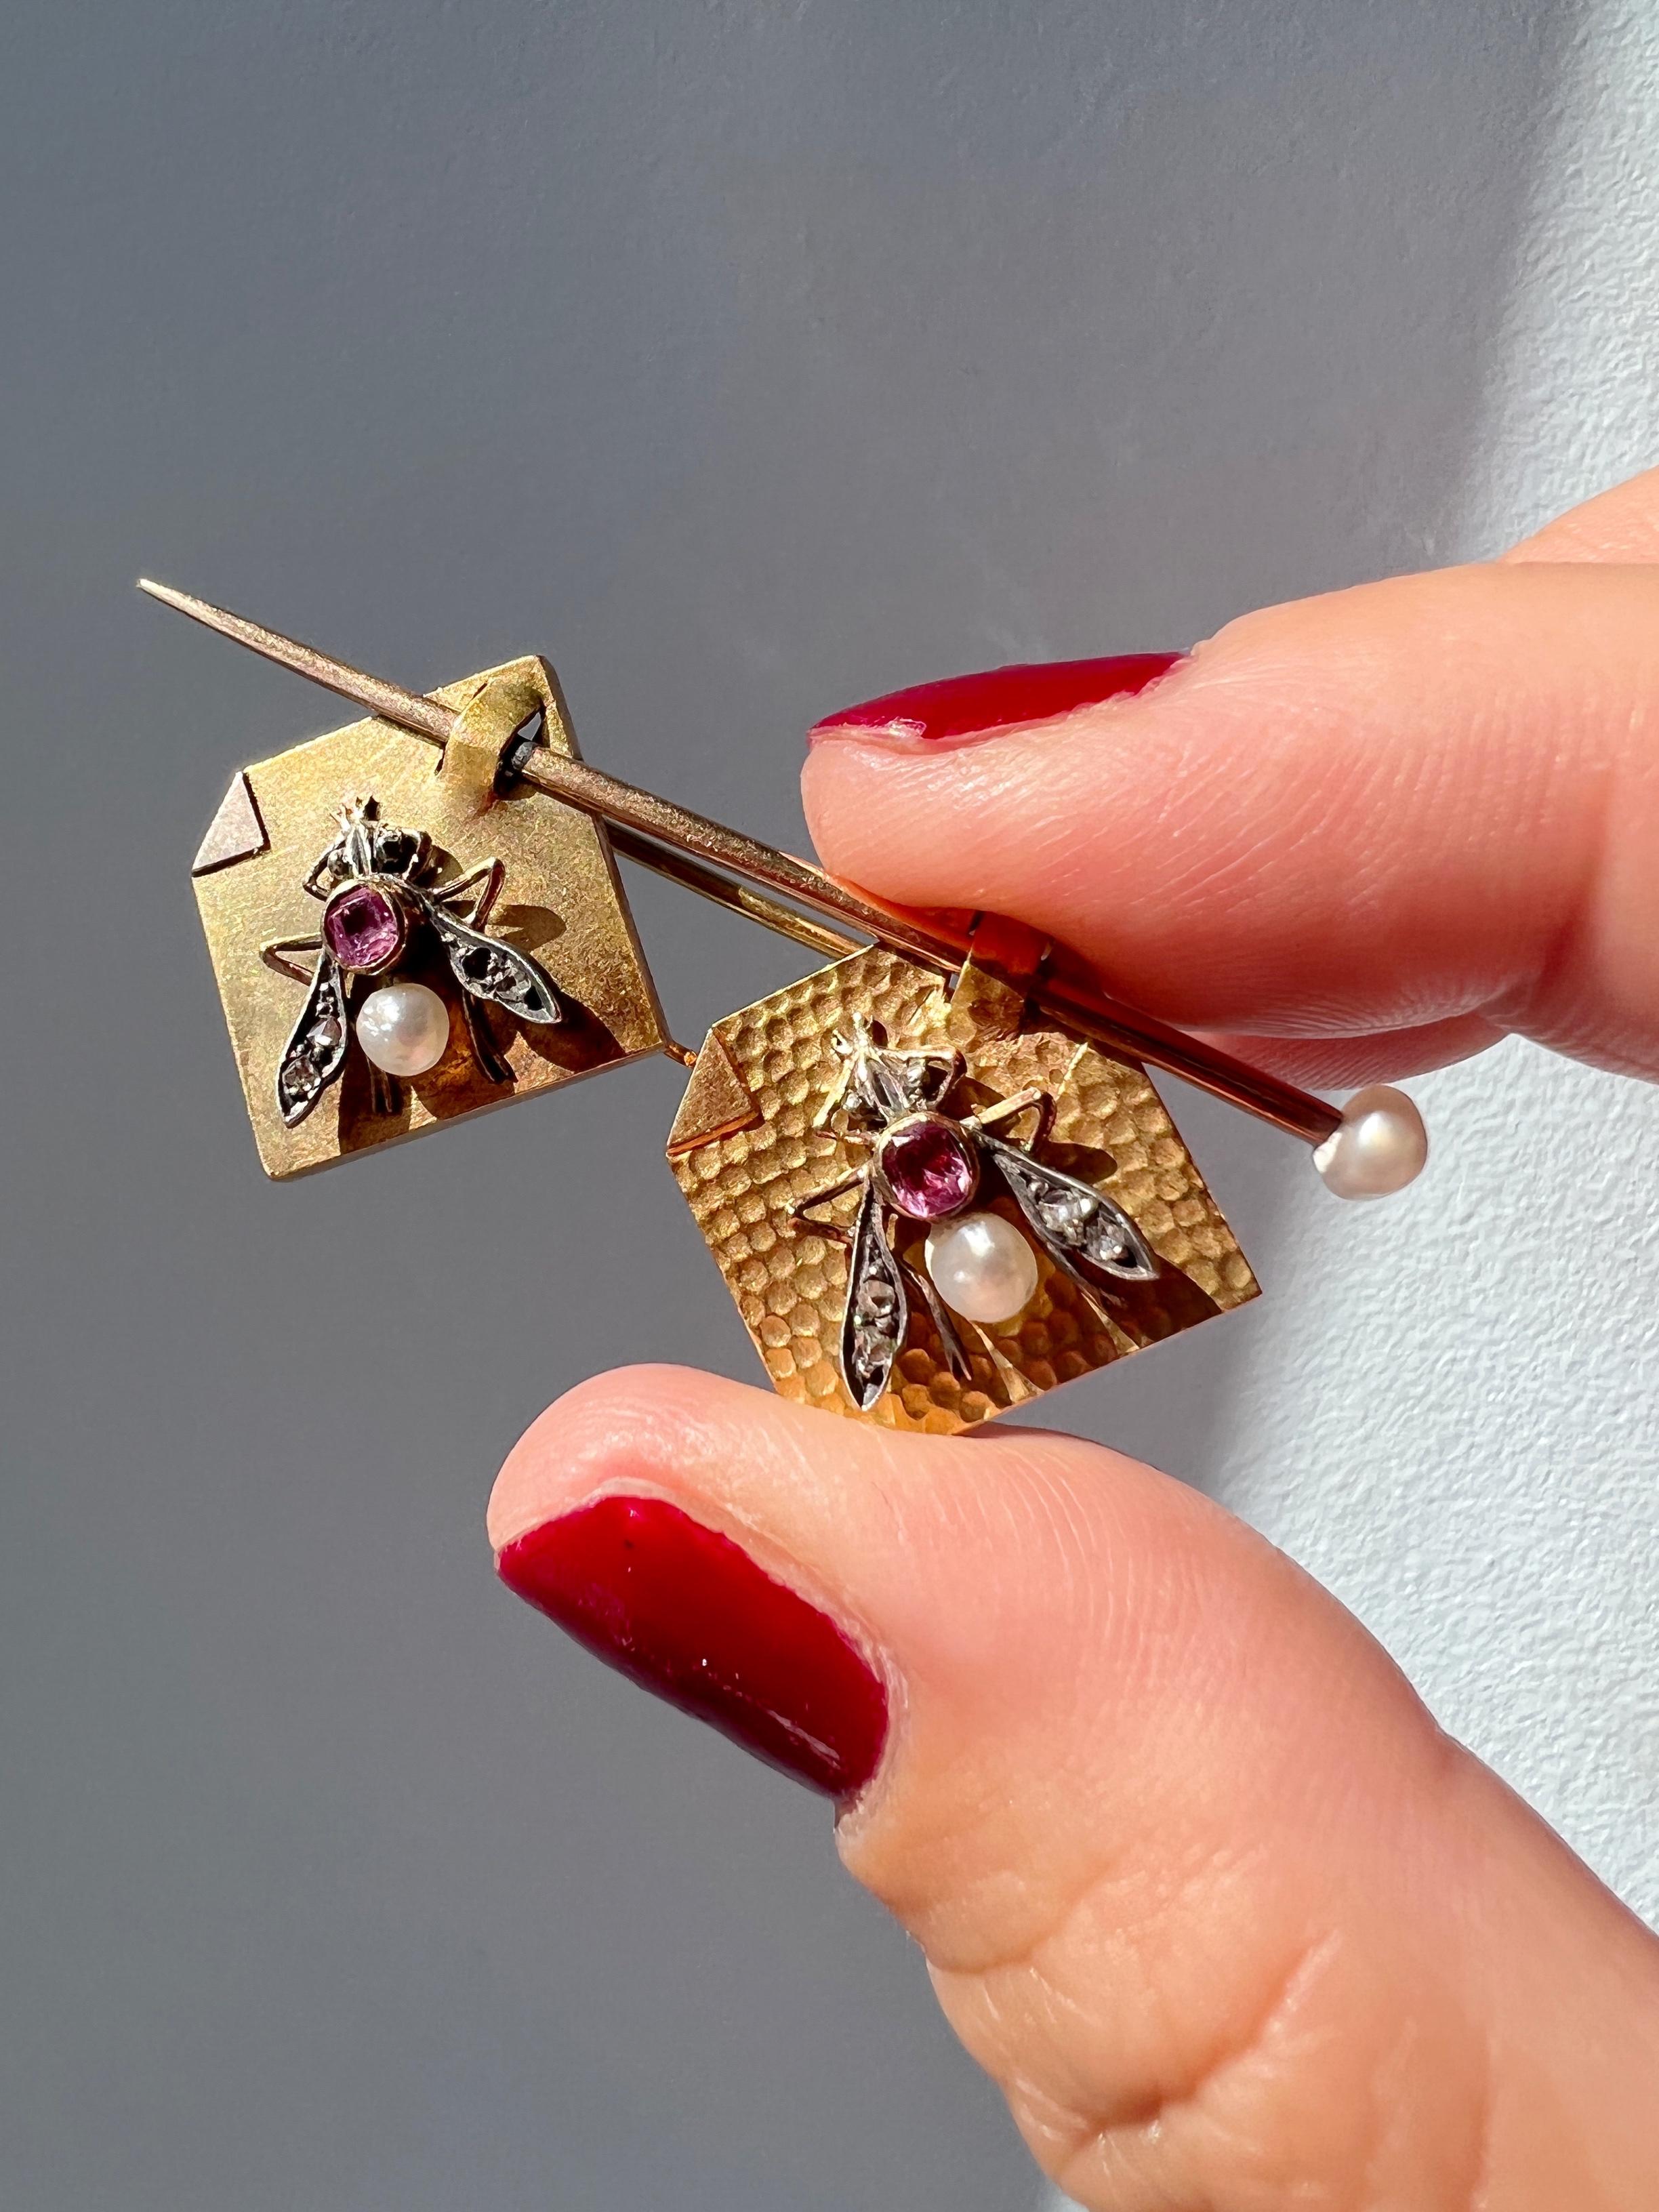 This very rare Victorian era fly brooch brings an exotic and vibrant mix of elements that combine imagination with beautiful and vivid colored gemstones. The brooch is mounted in 18K yellow gold featuring two little flies made of diamonds in rose